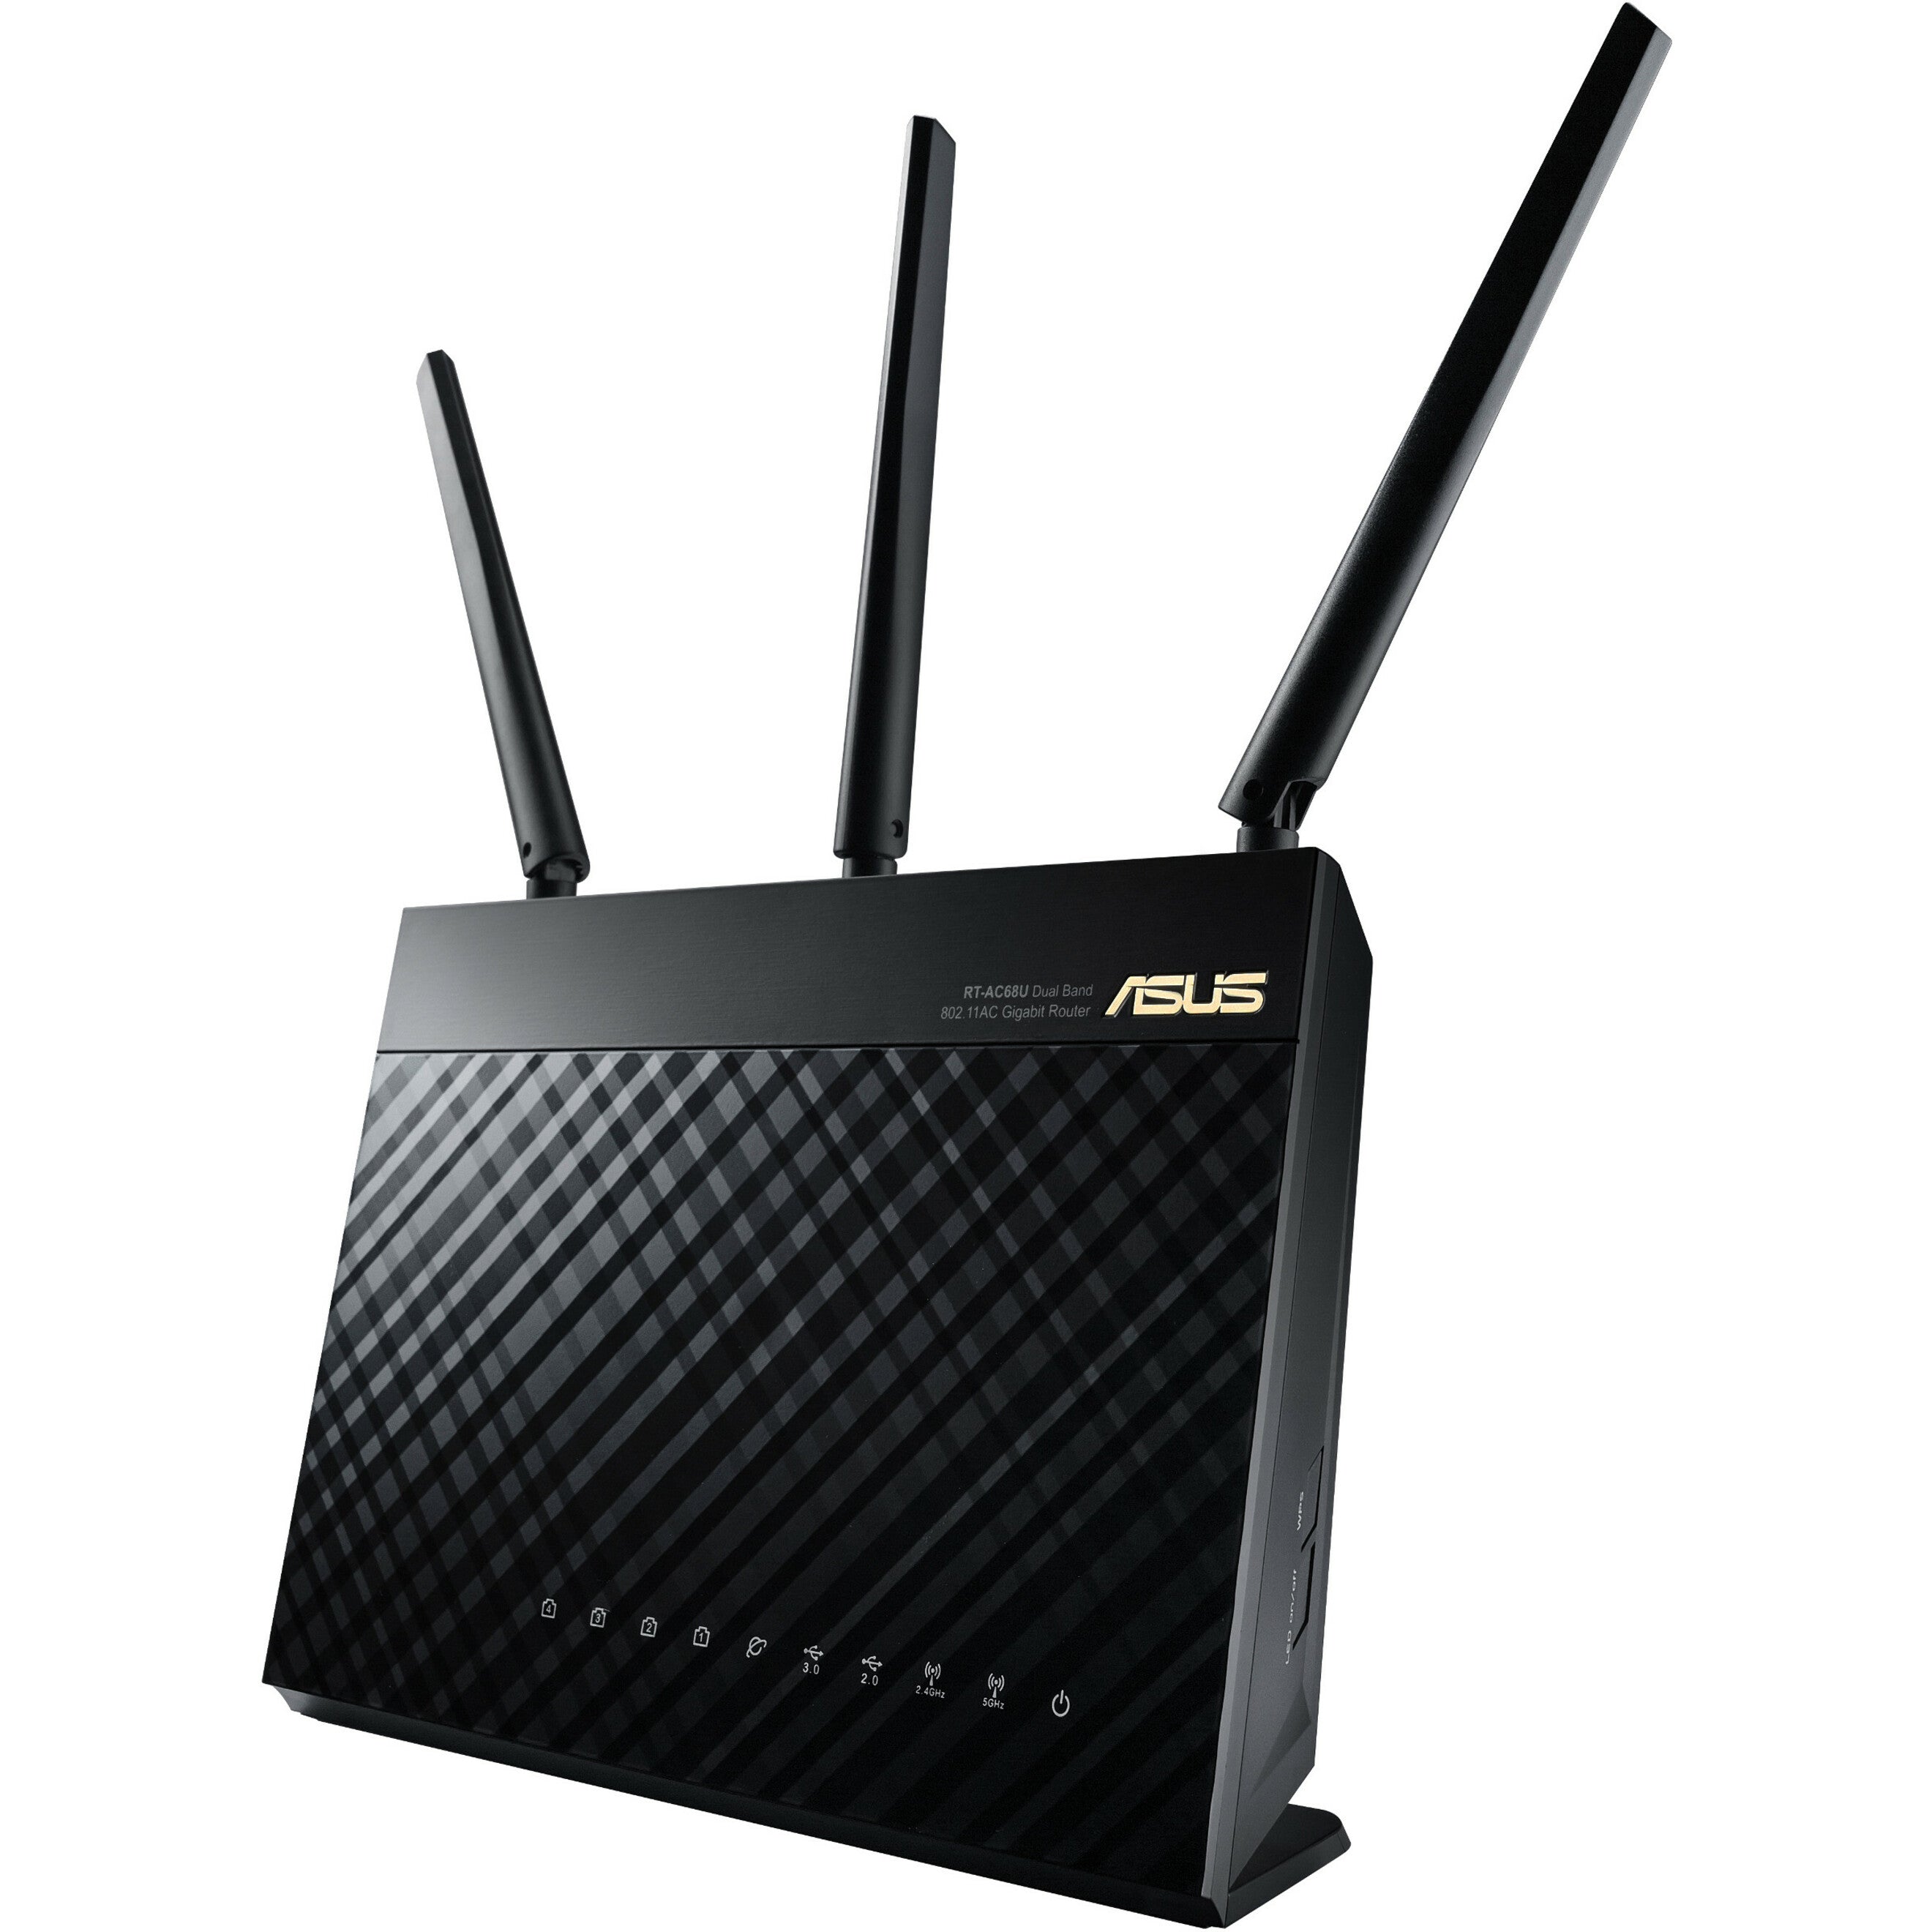 Asus RT-AC68U Wi-Fi 5 IEEE 802.11ac Dual-Band Wireless-AC1900 Gigabit Router, High-Speed Internet Connectivity